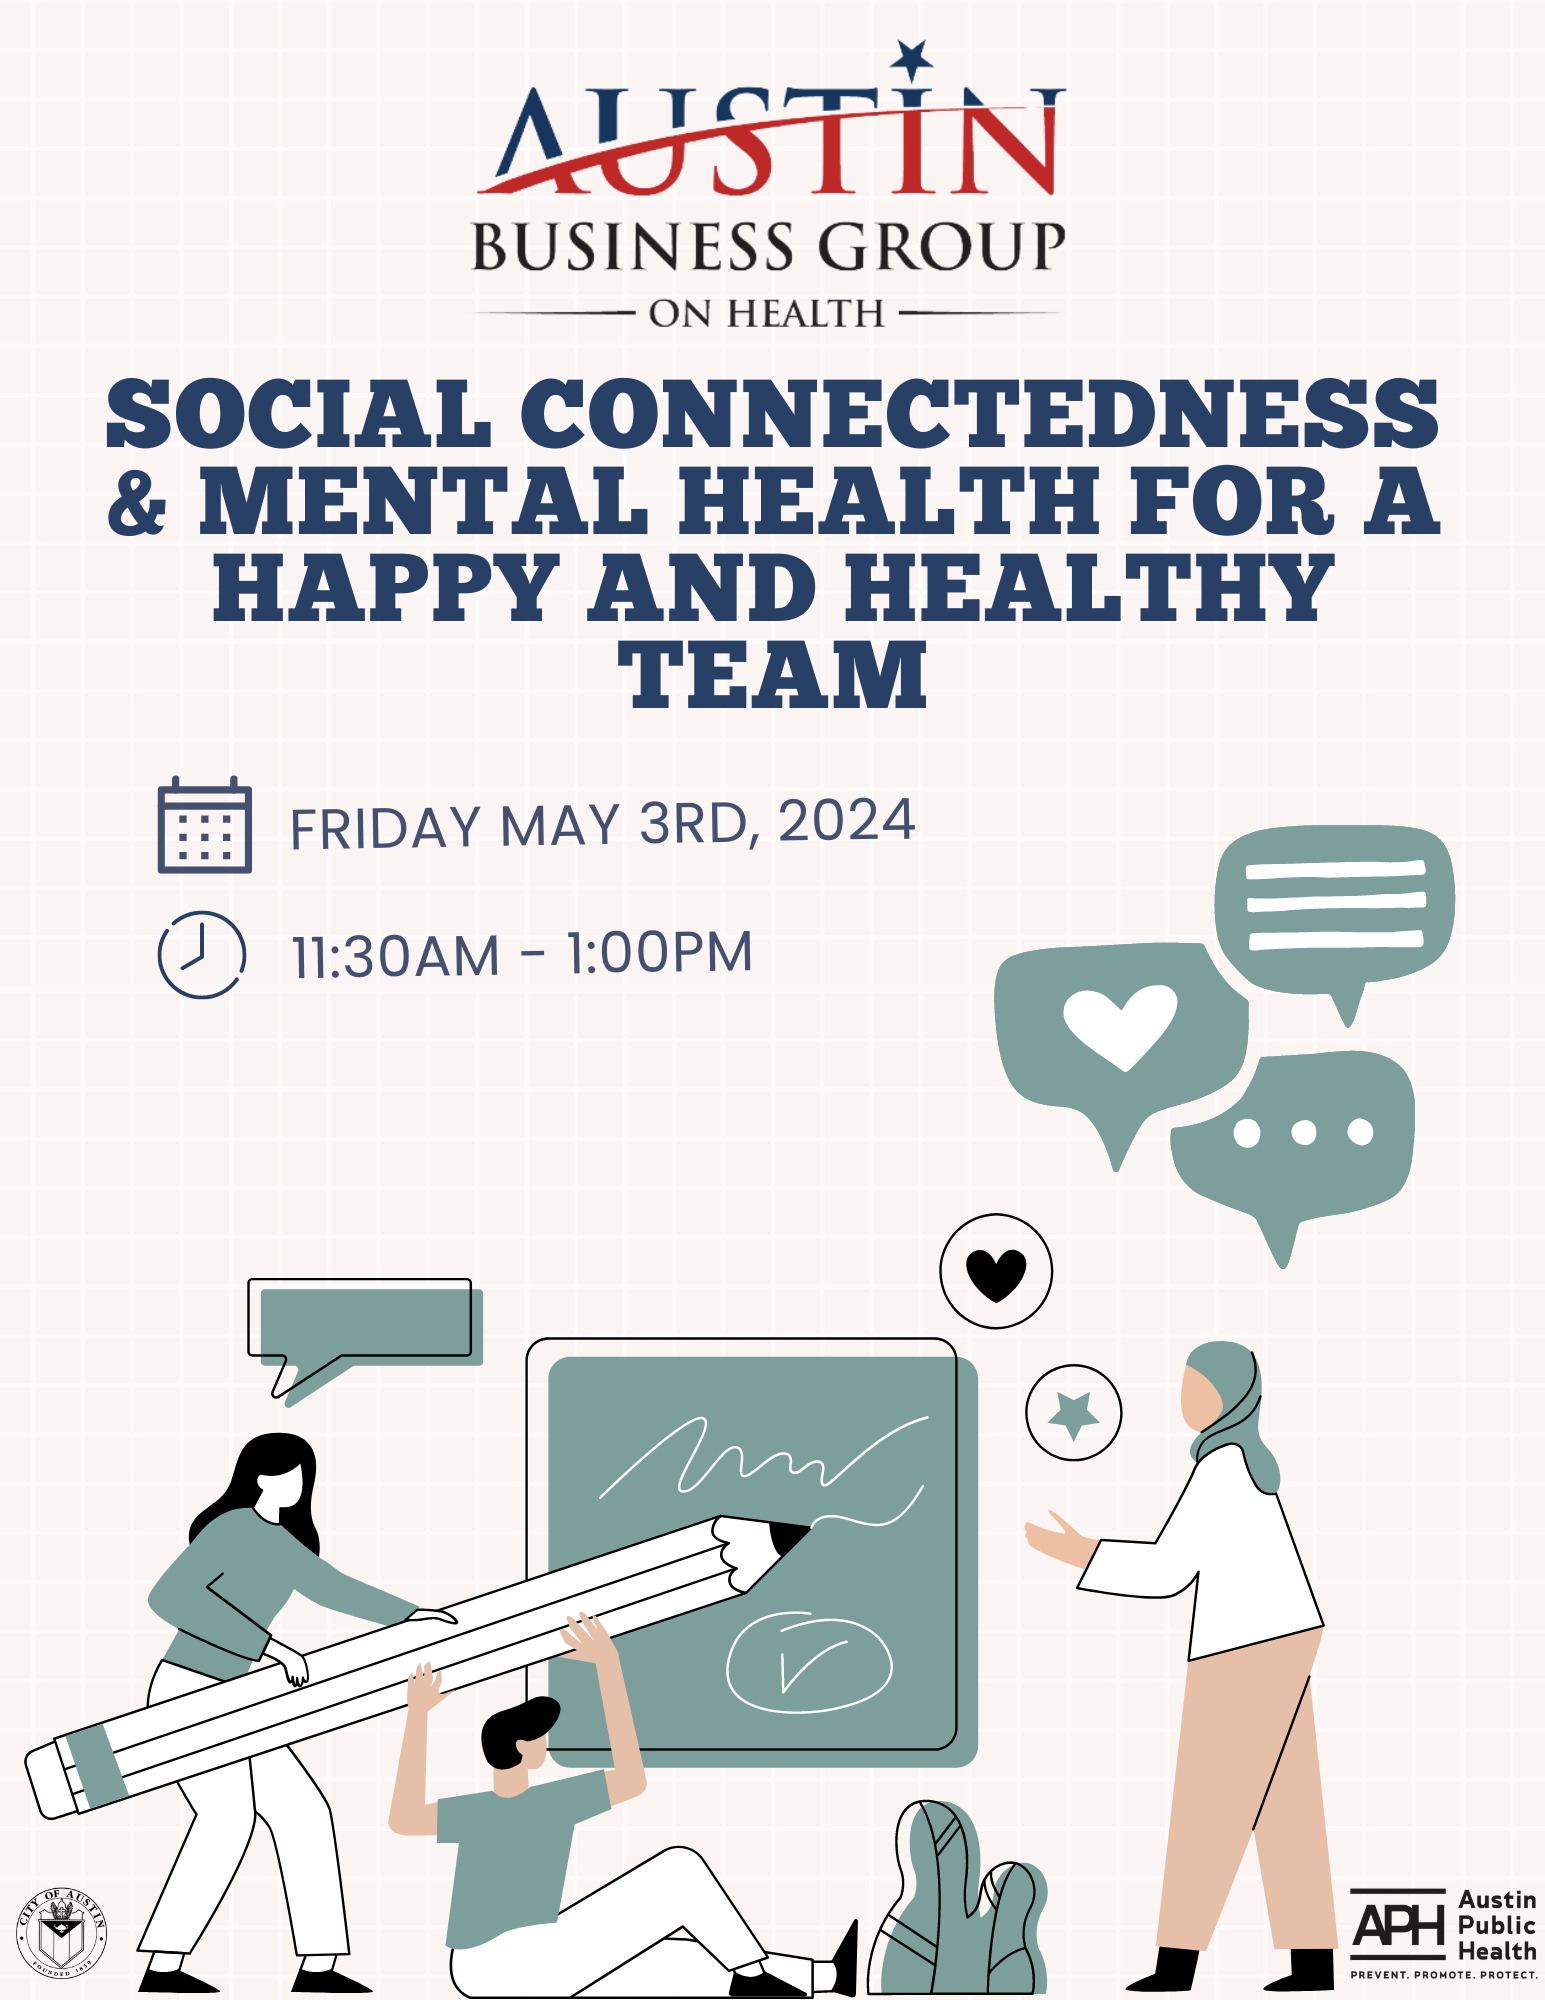 Social Connectedness & Mental Health for a Happy and Healthy Team!